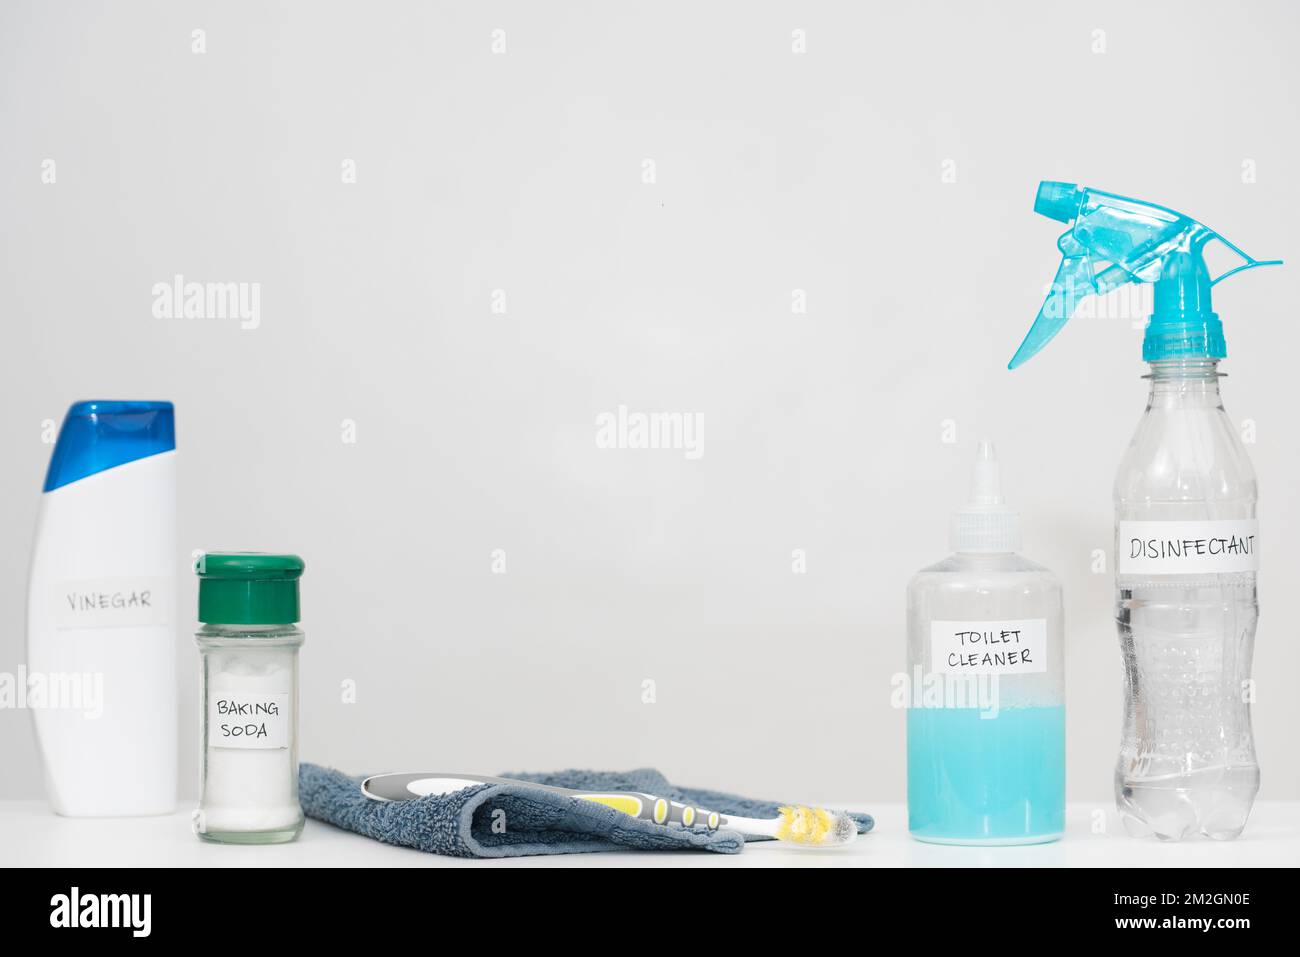 Home cleaning products with labels in reused plastic bottles. Recycled household containers on white background. Horizontal copy space. Reduce concept. Stock Photo